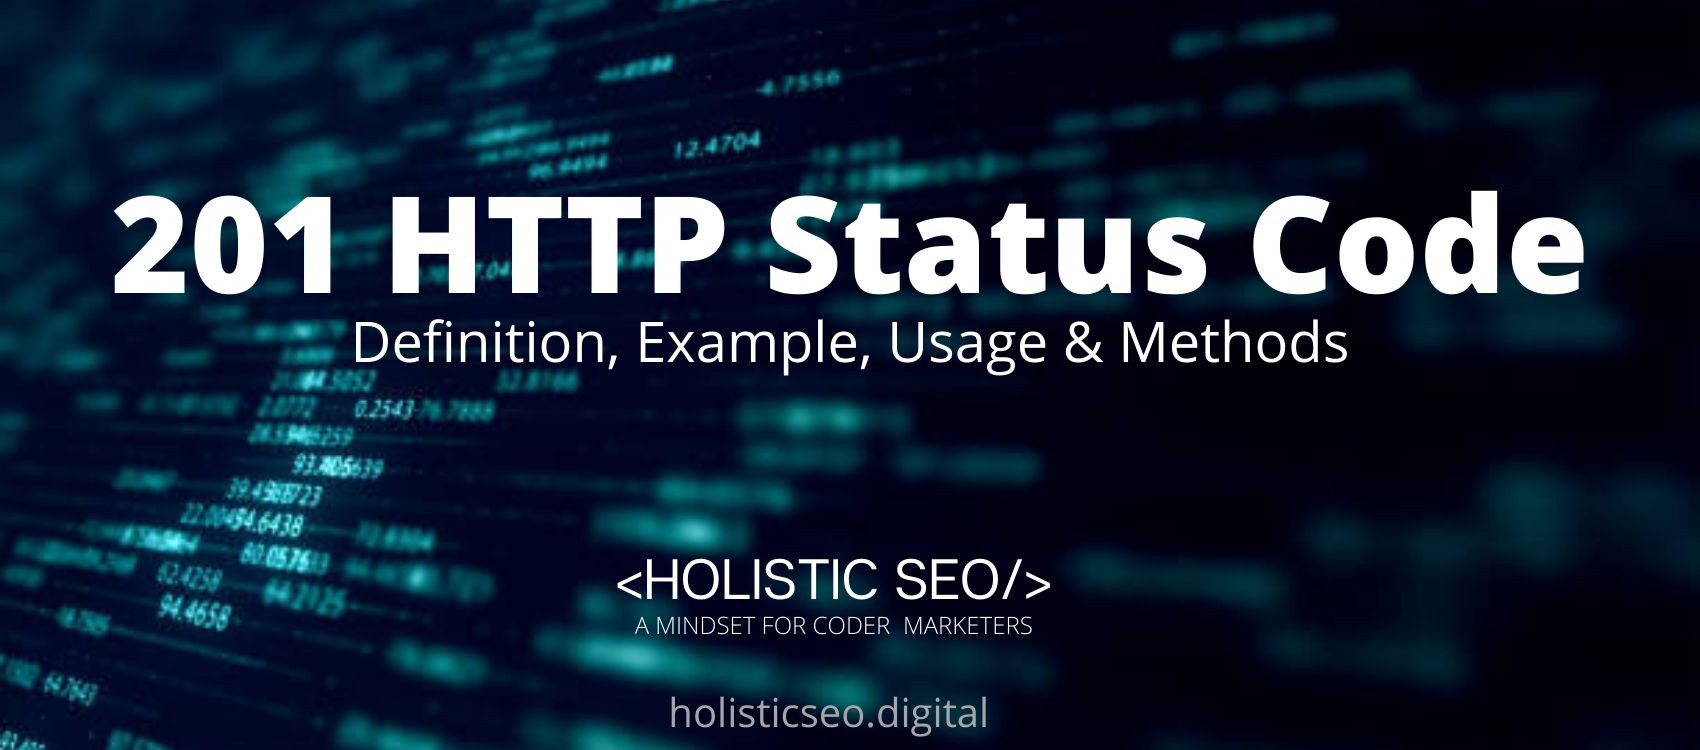 What Are HTTPS Status Codes and What Do They Mean?